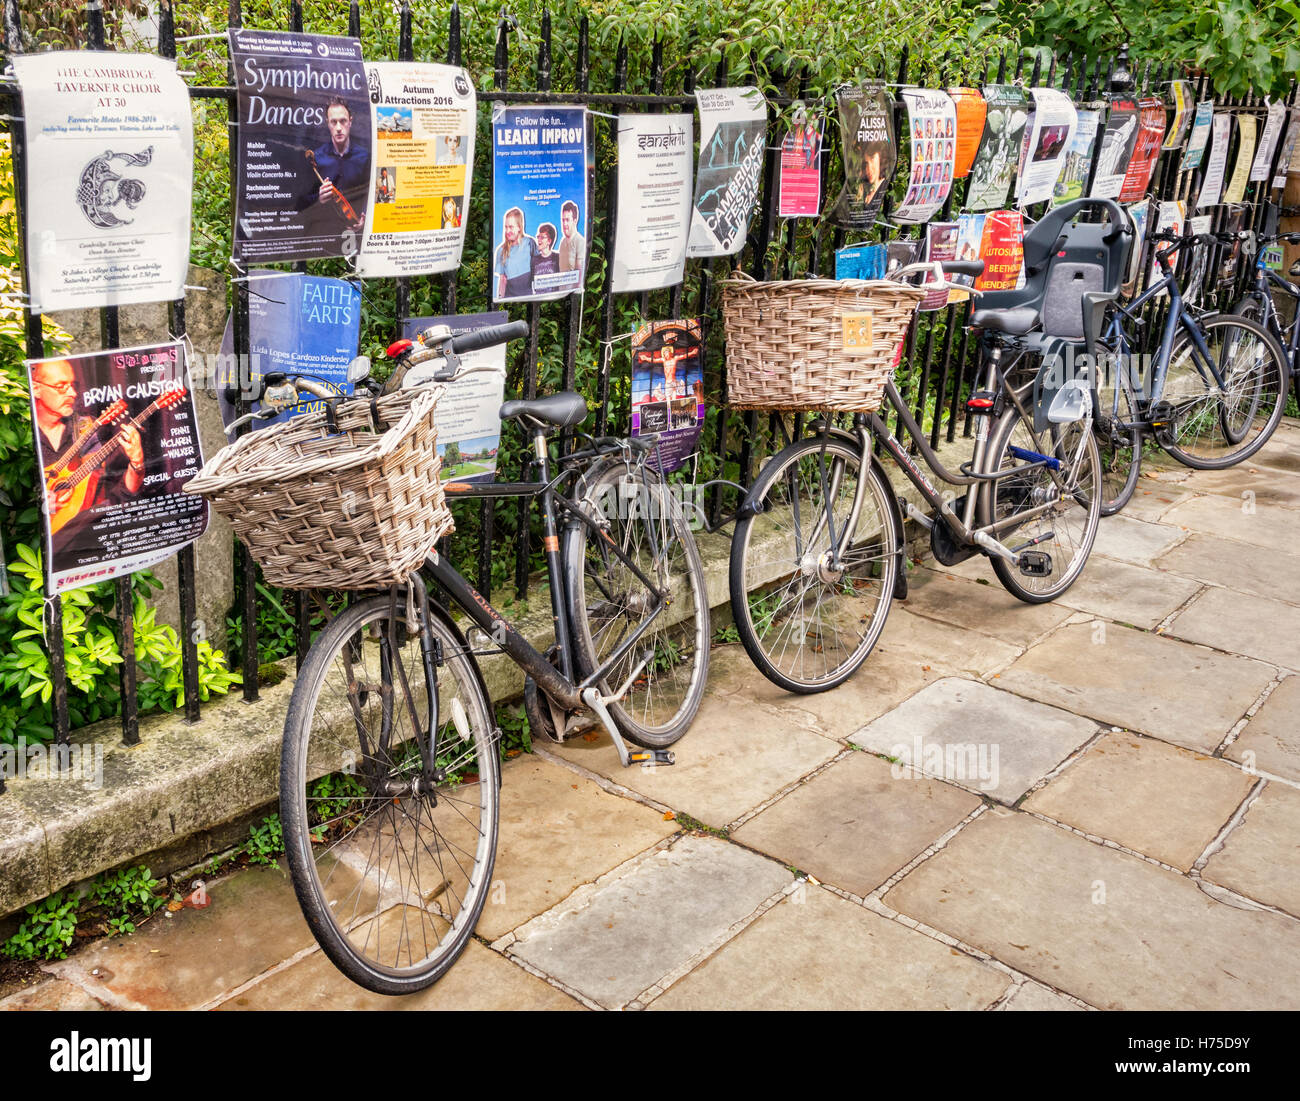 Cambridge bicycles leaning against a fence covered in posters, England, UK Stock Photo